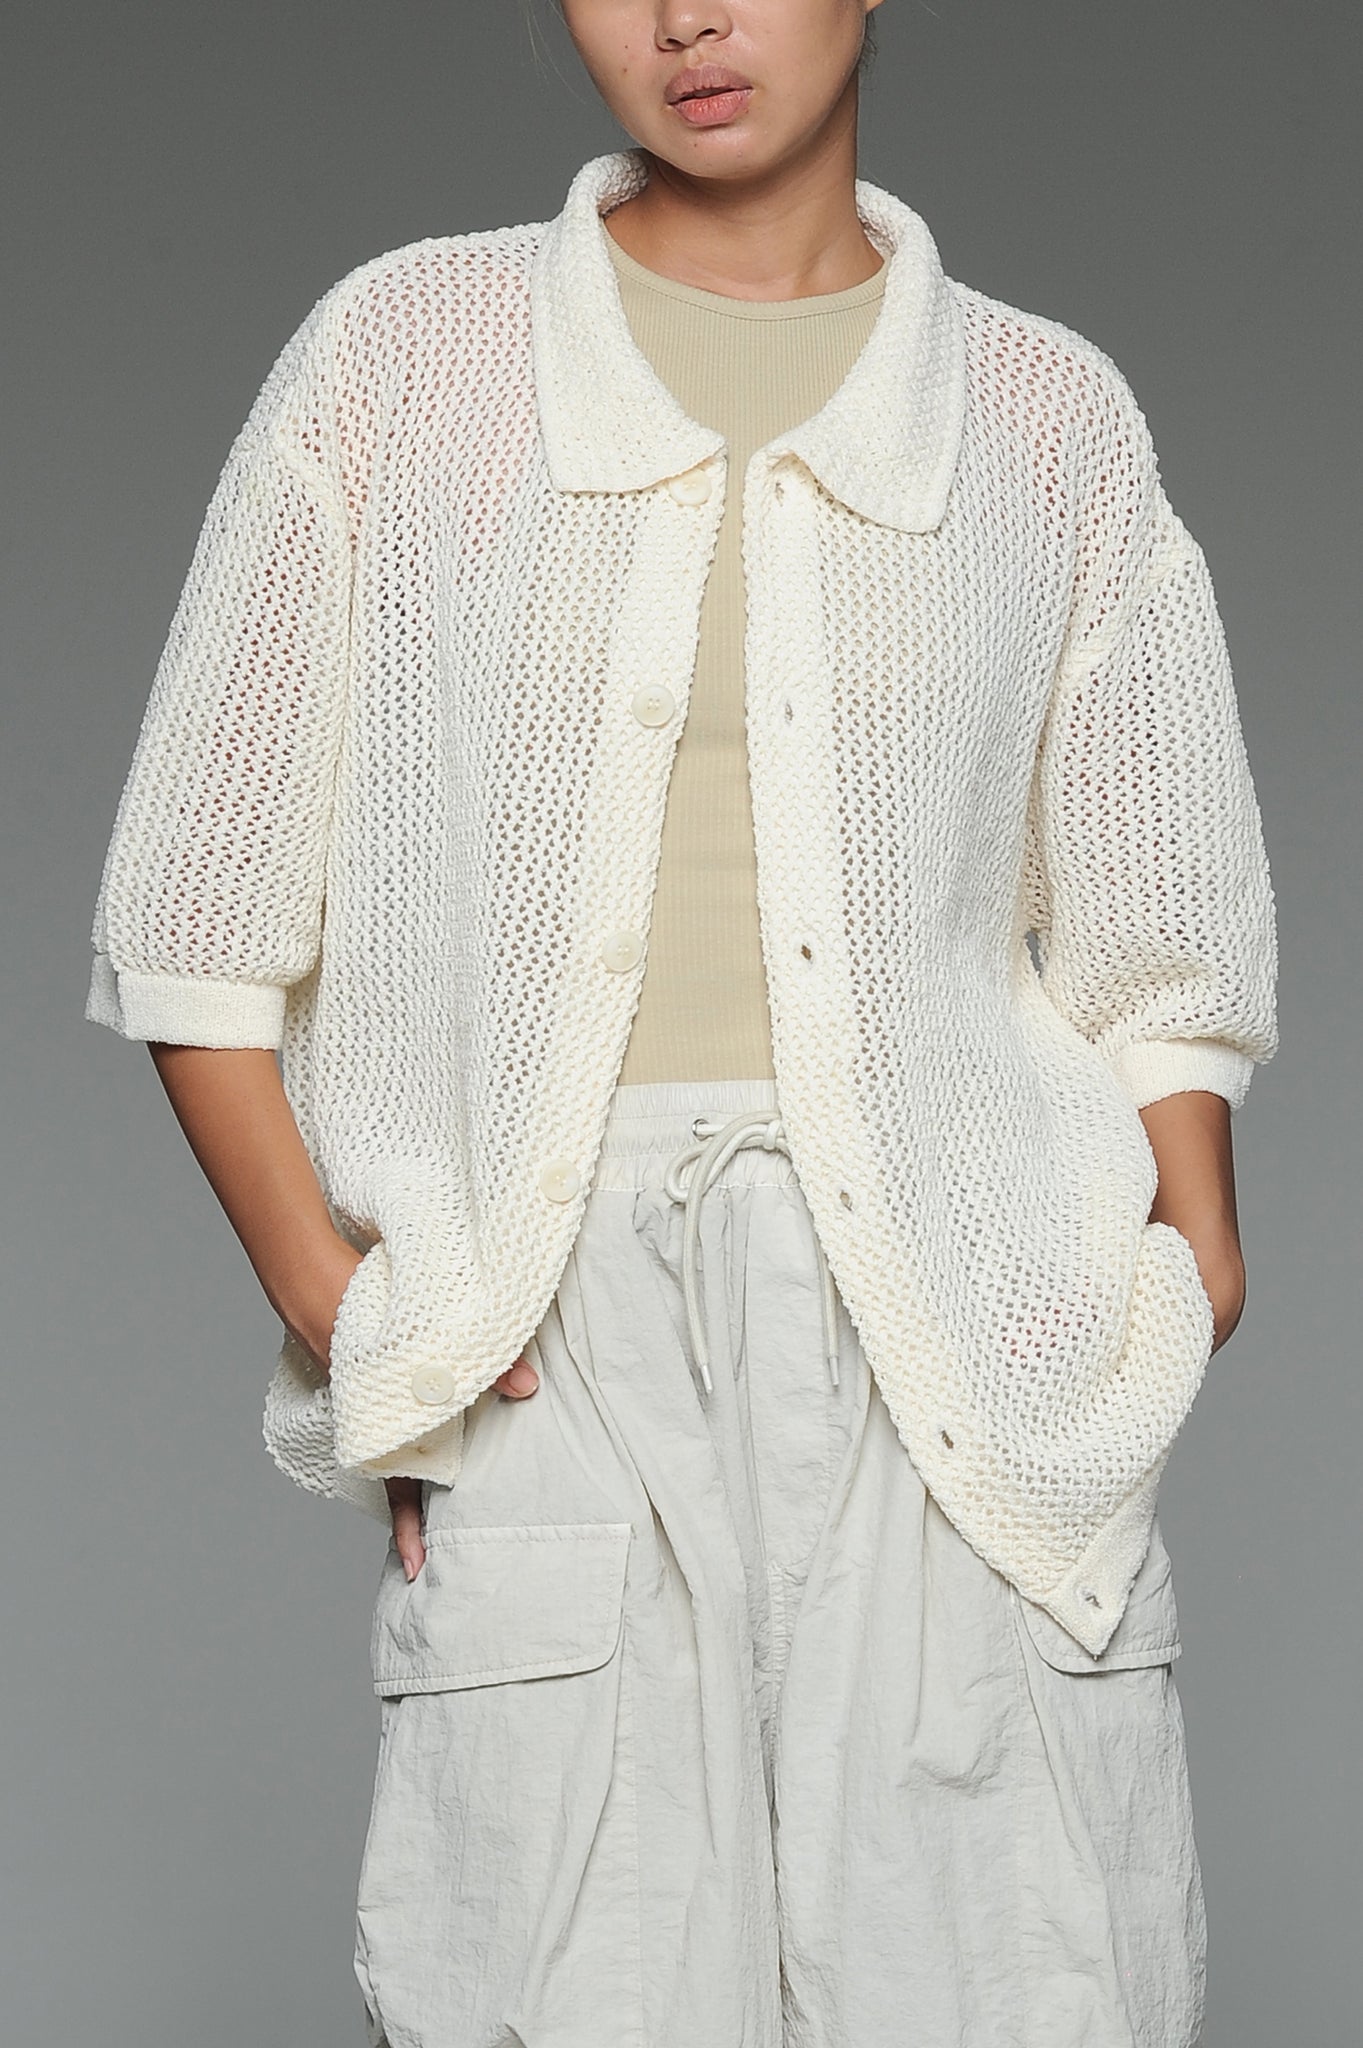 Off-White Knit Collared Cardigan